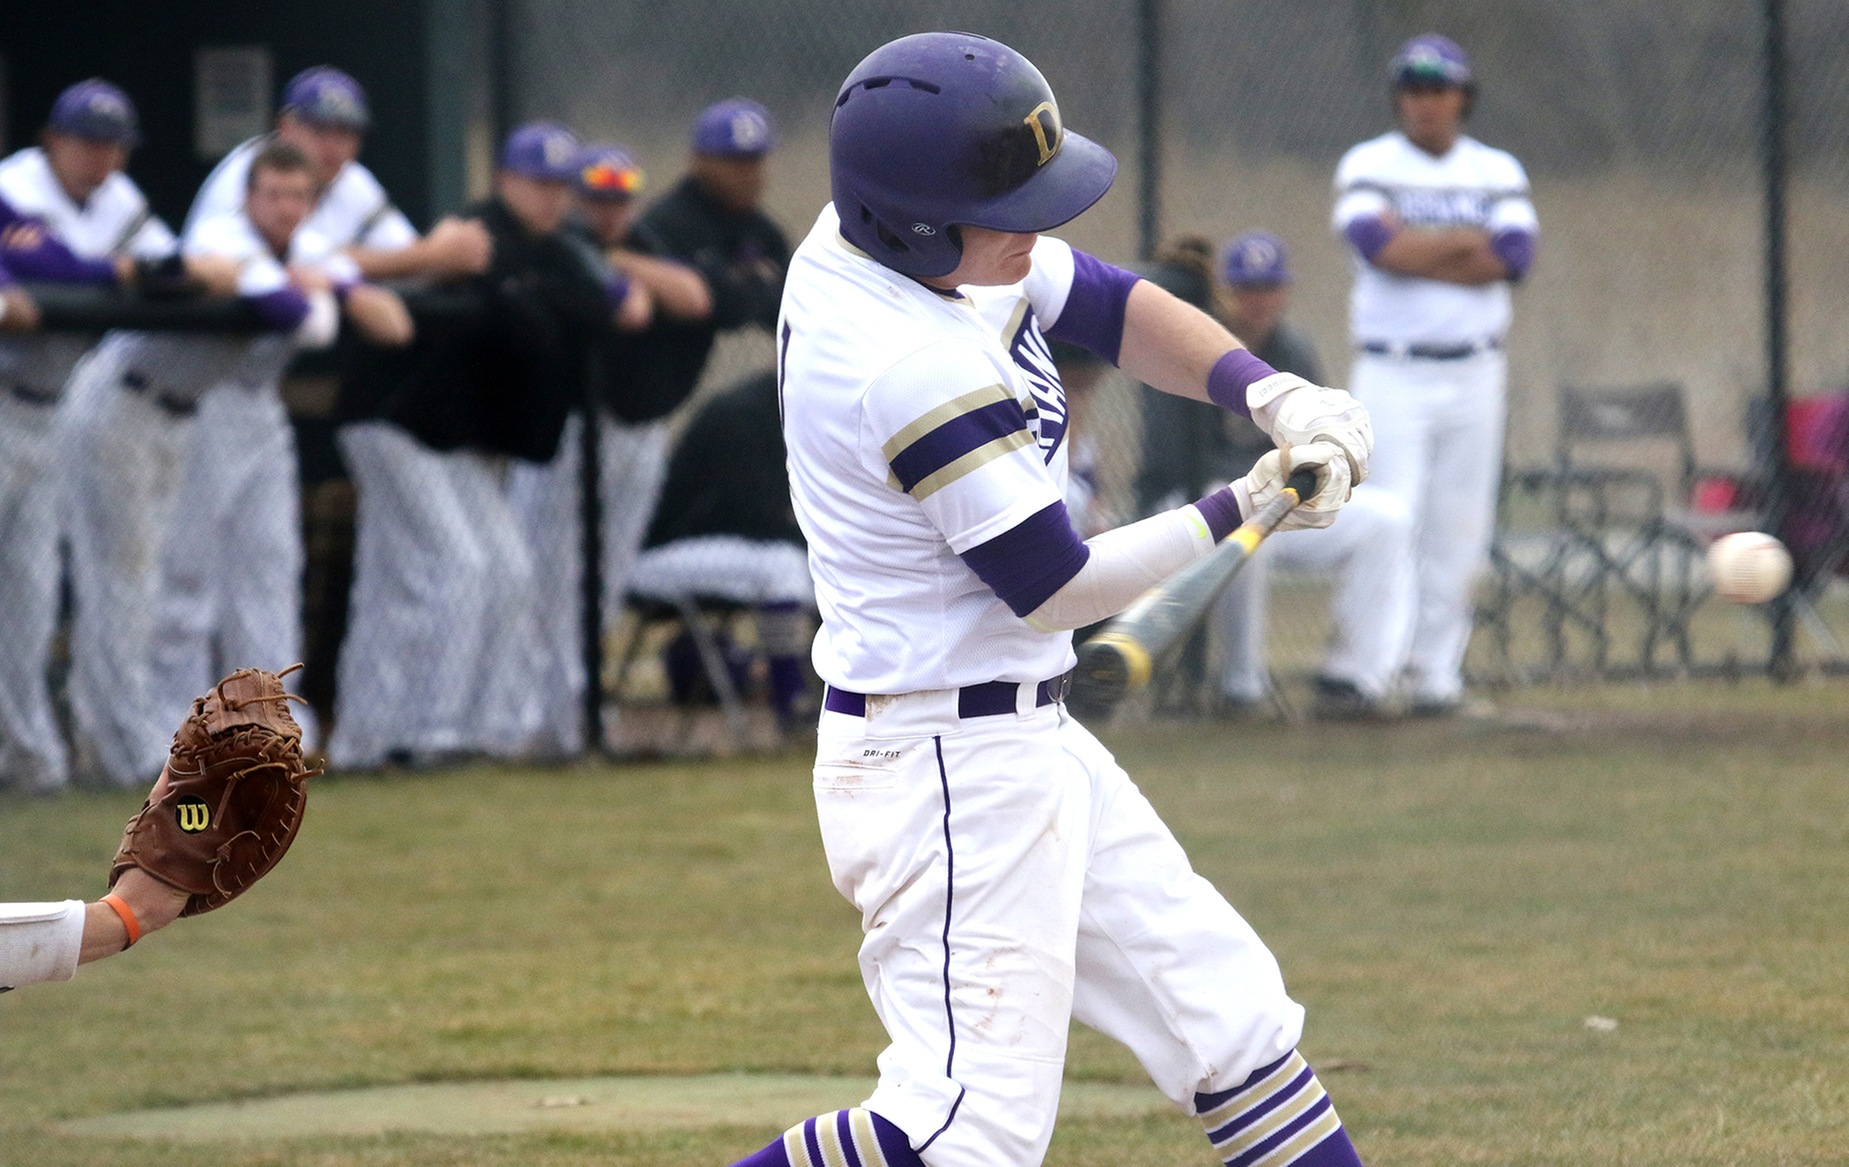 DC Baseball Opens Three-Game Series with Loss